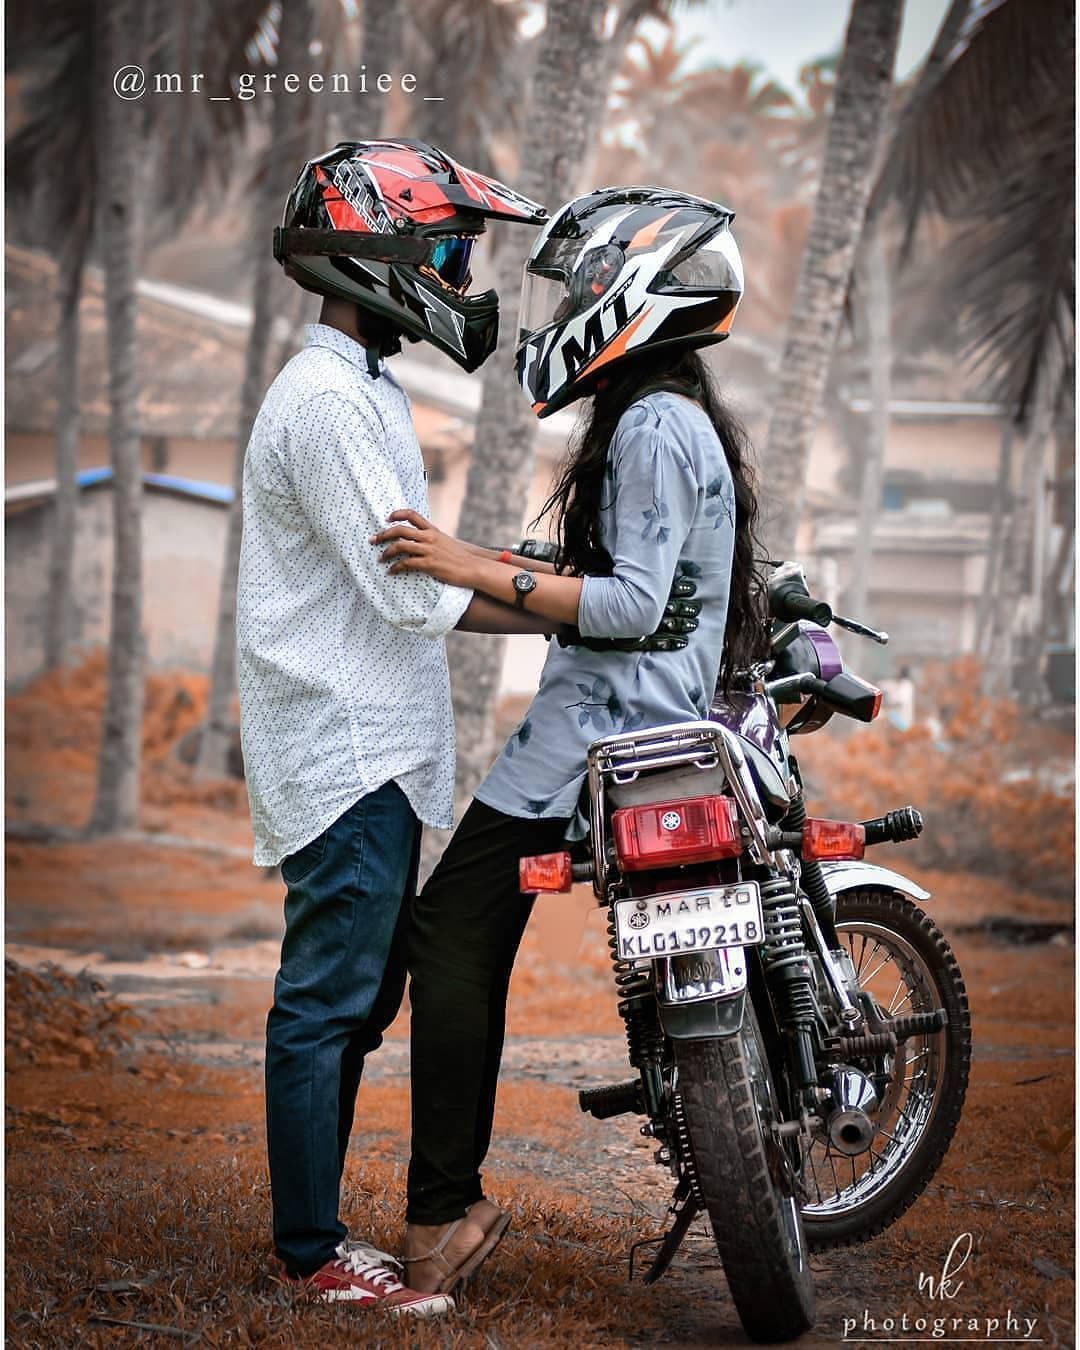 Bike Couples Wallpapers Wallpaper Cave